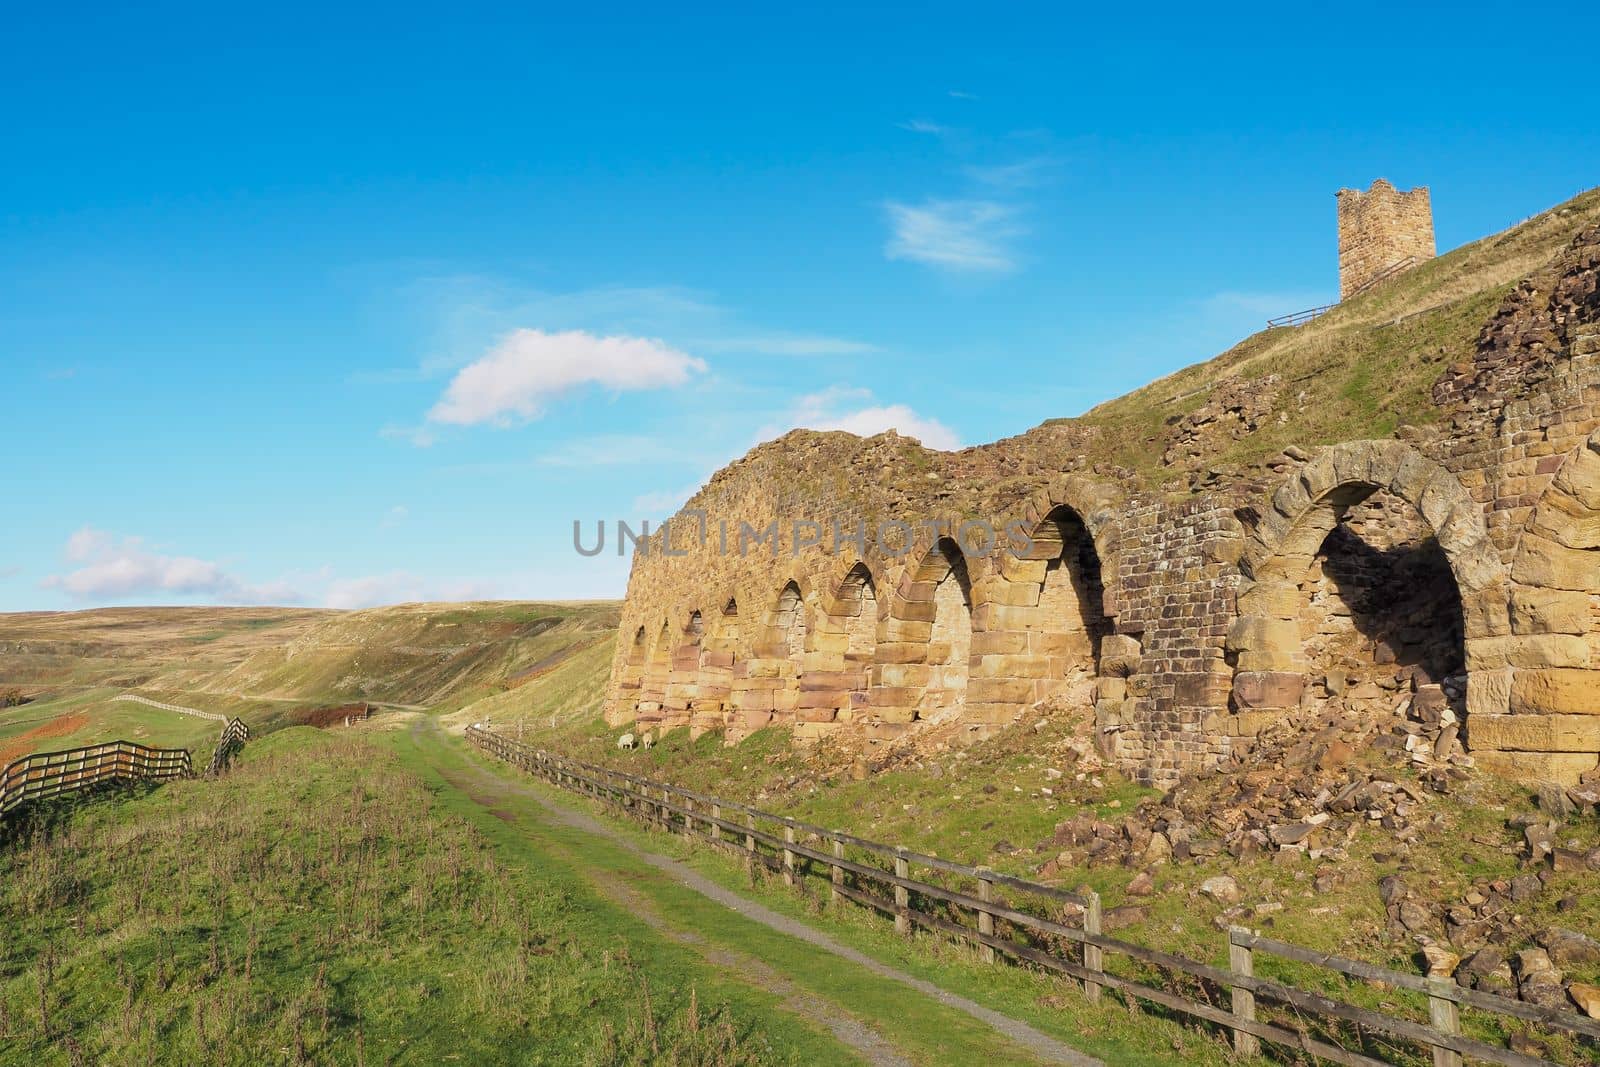 The ruins of the ironstone kilns used for roasting the ore mined from the hillside, East Rosedale Mines on the Rosedale Ironstone Railway, North York Moors National Park, UK